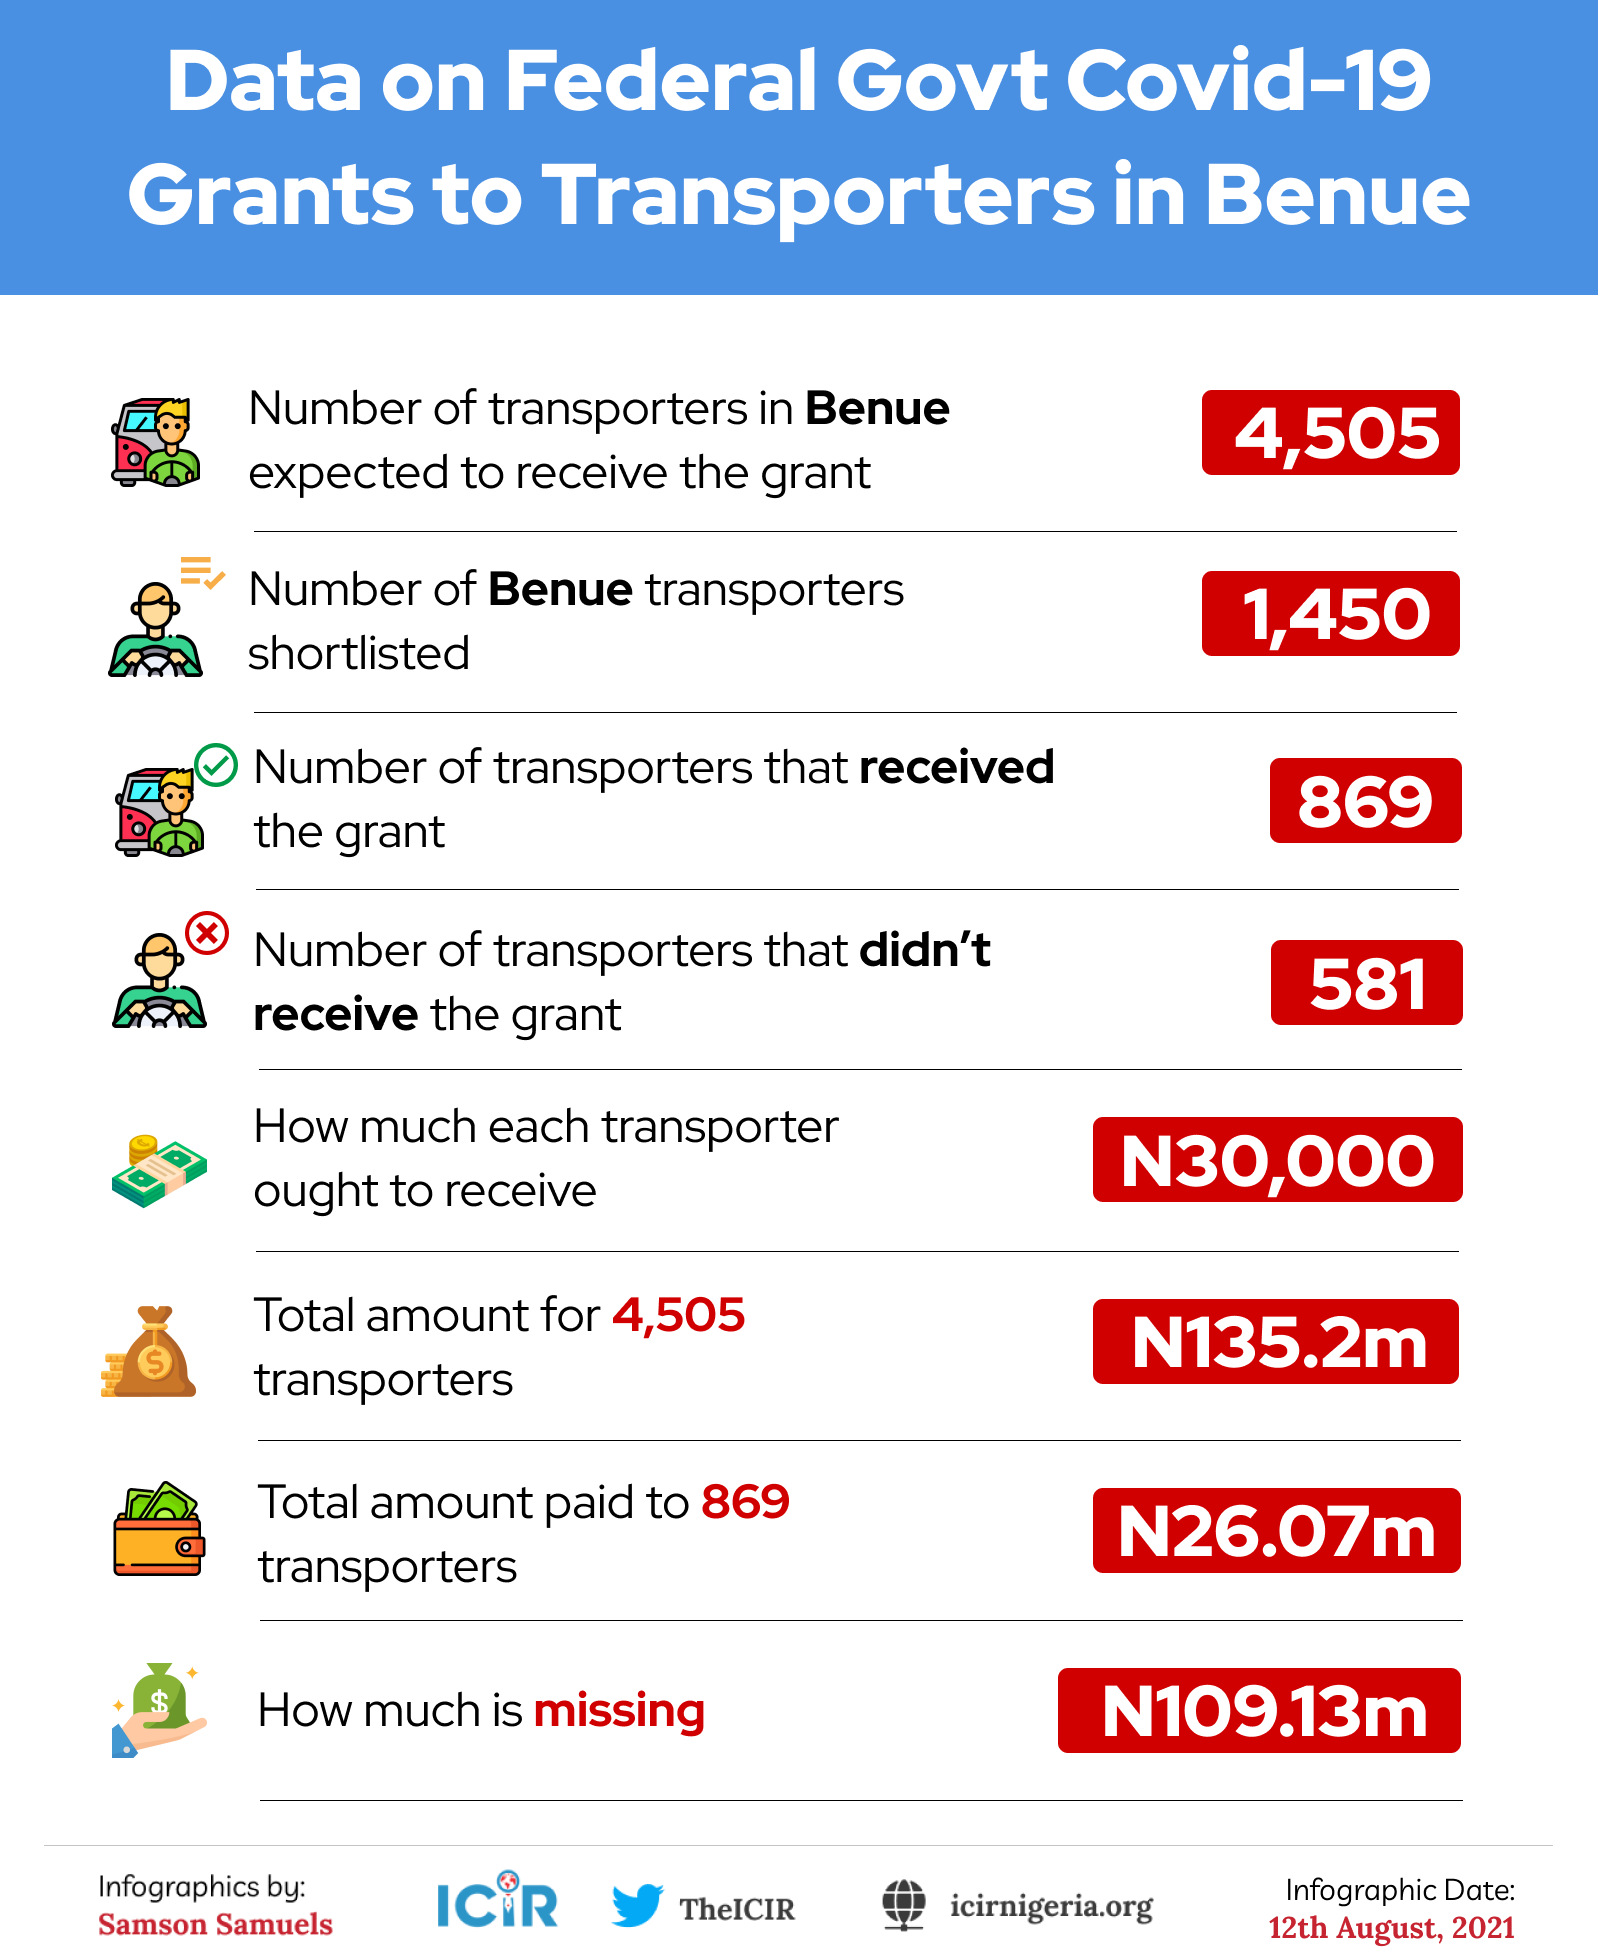 Data on Federal Govt COVID-19 grants to transporters in Benue